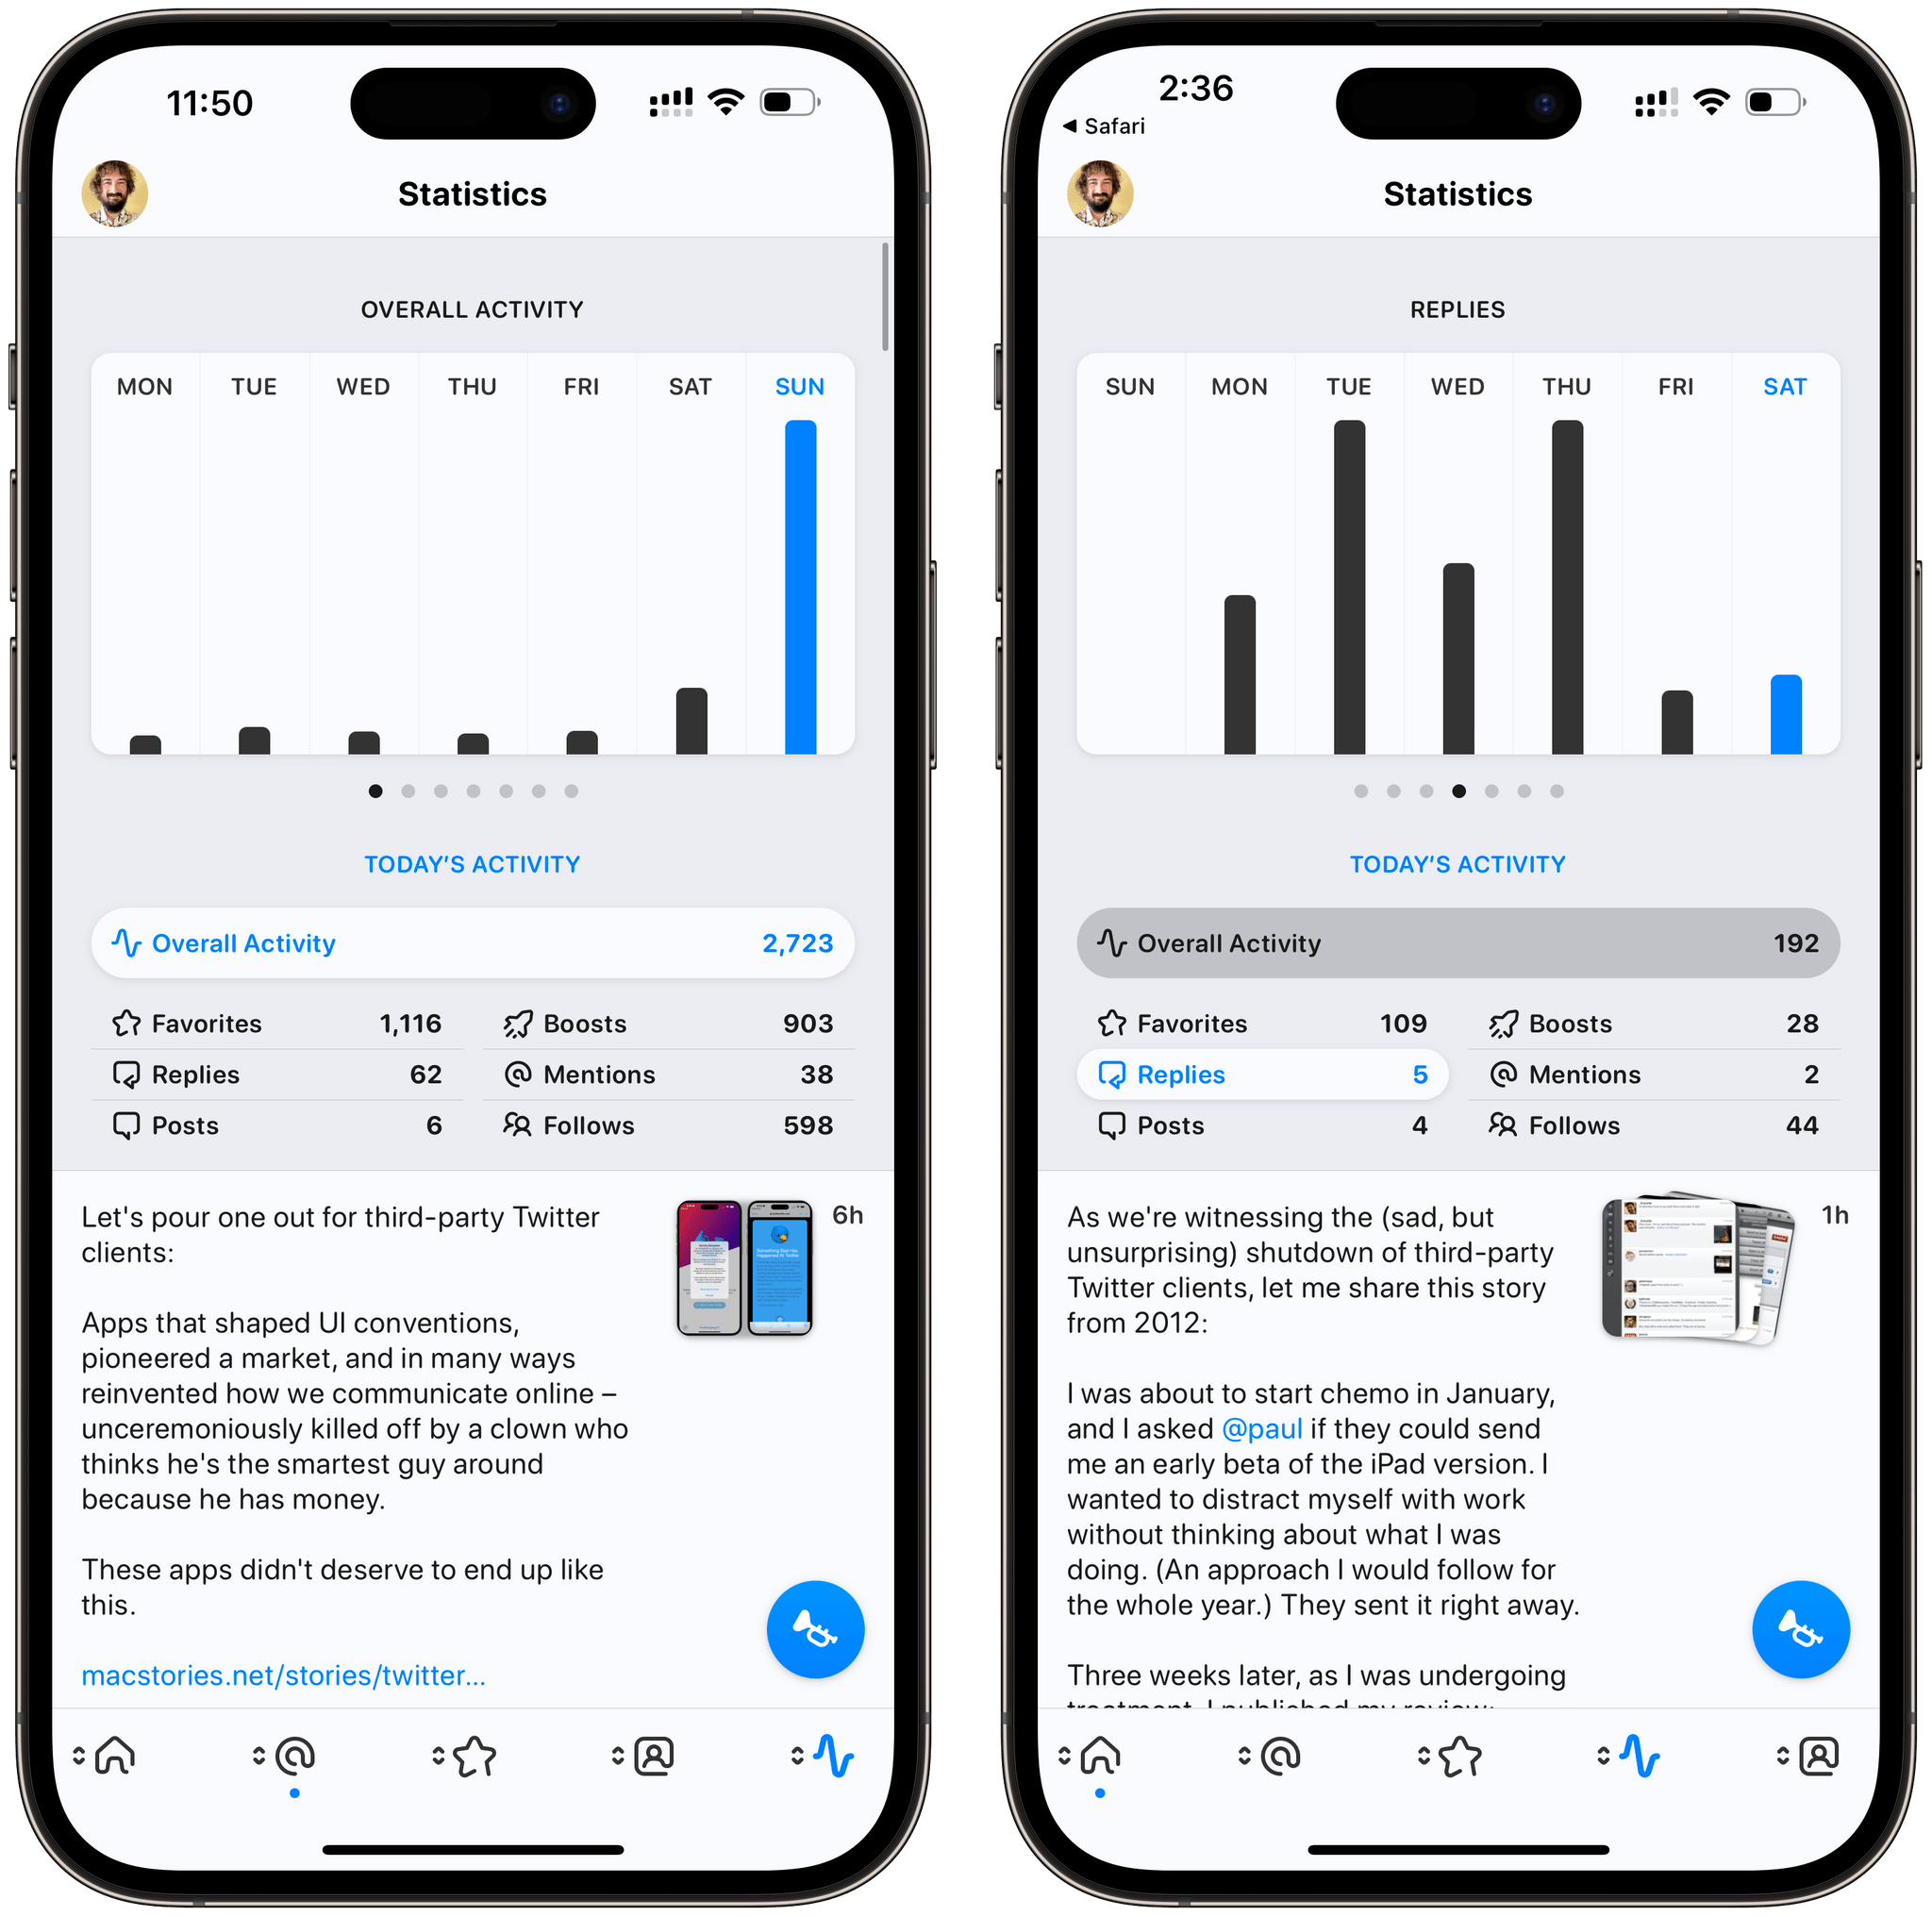 Another delightful detail: in the Statistics page, the charts animate as you open them and the selected data type is highlighted as you swipe horizontally to switch between chart views.